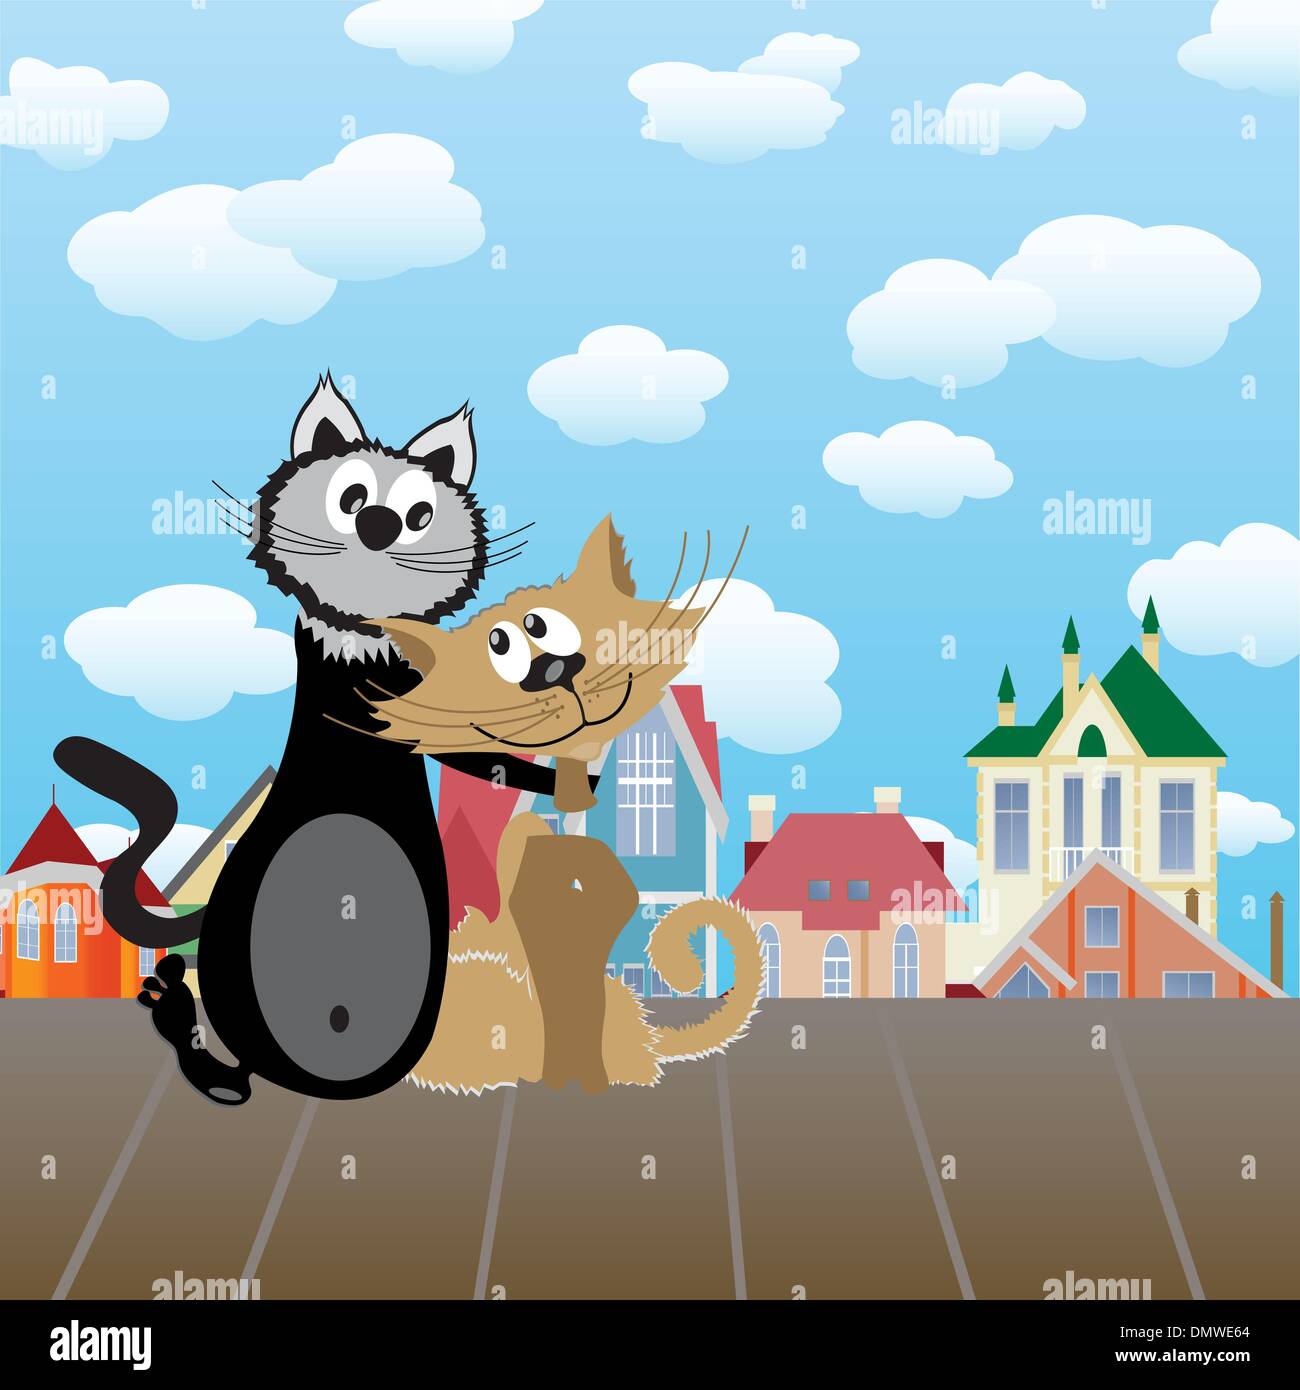 100,000 Two cats Vector Images